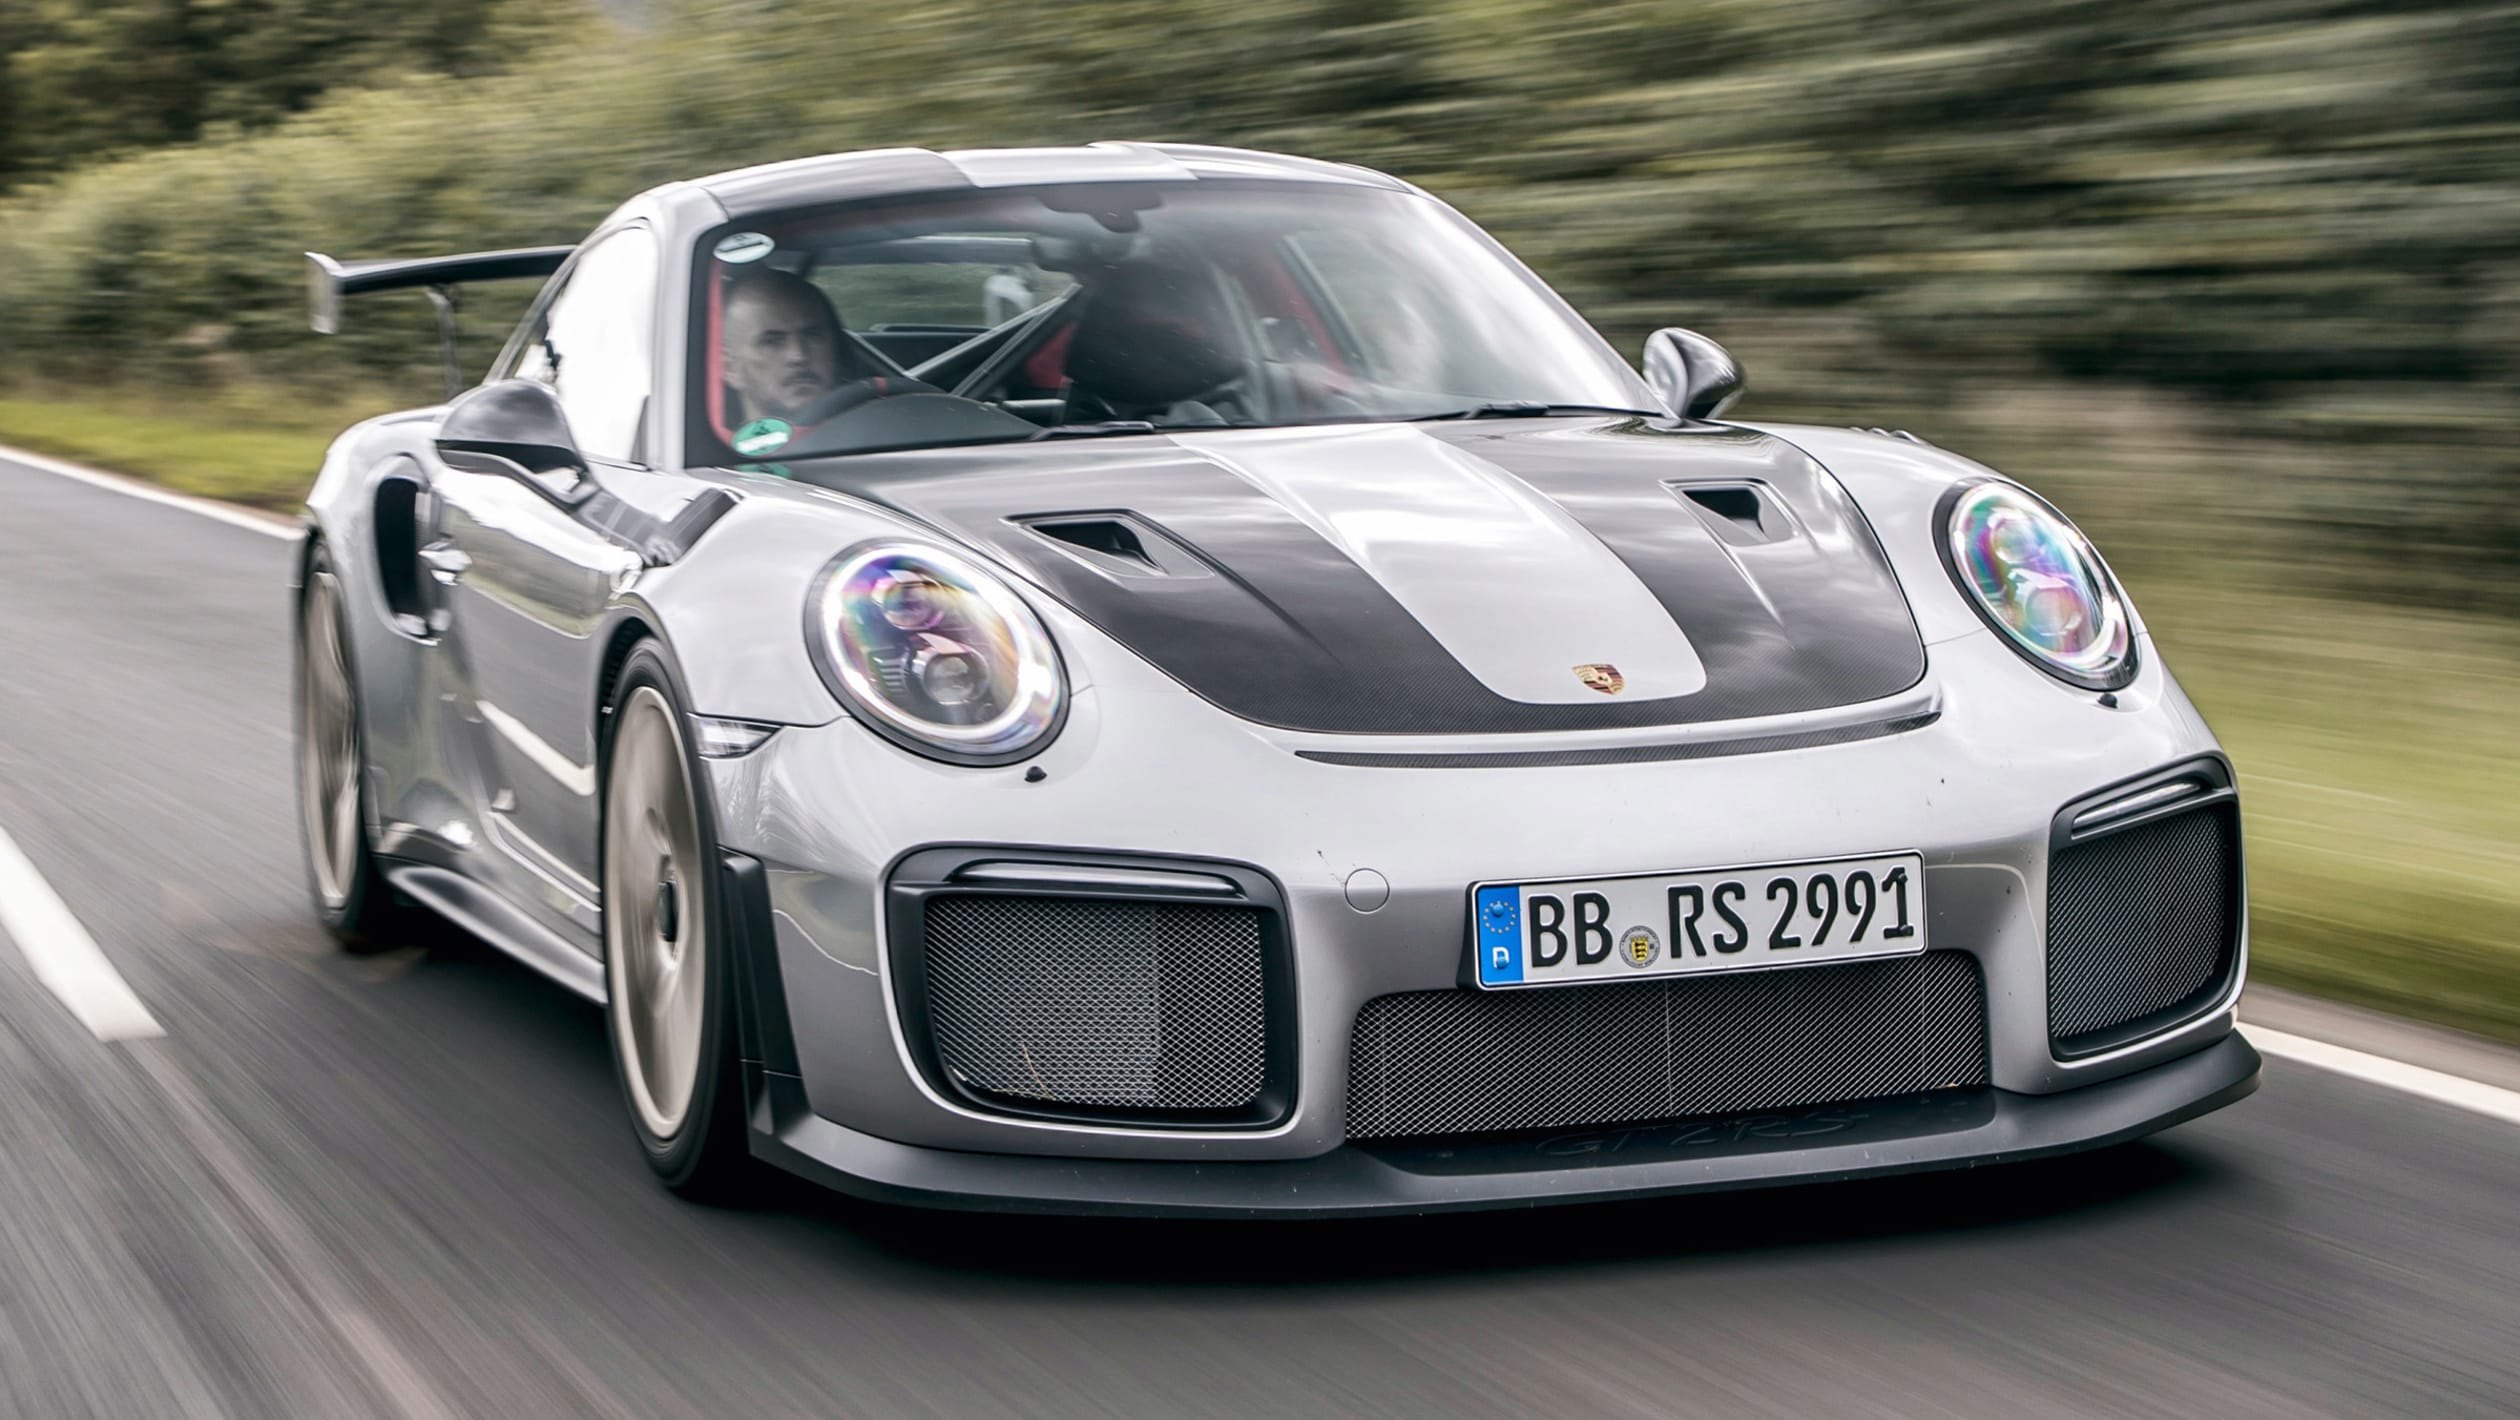 New Porsche 911 GT2 RS review pictures evo